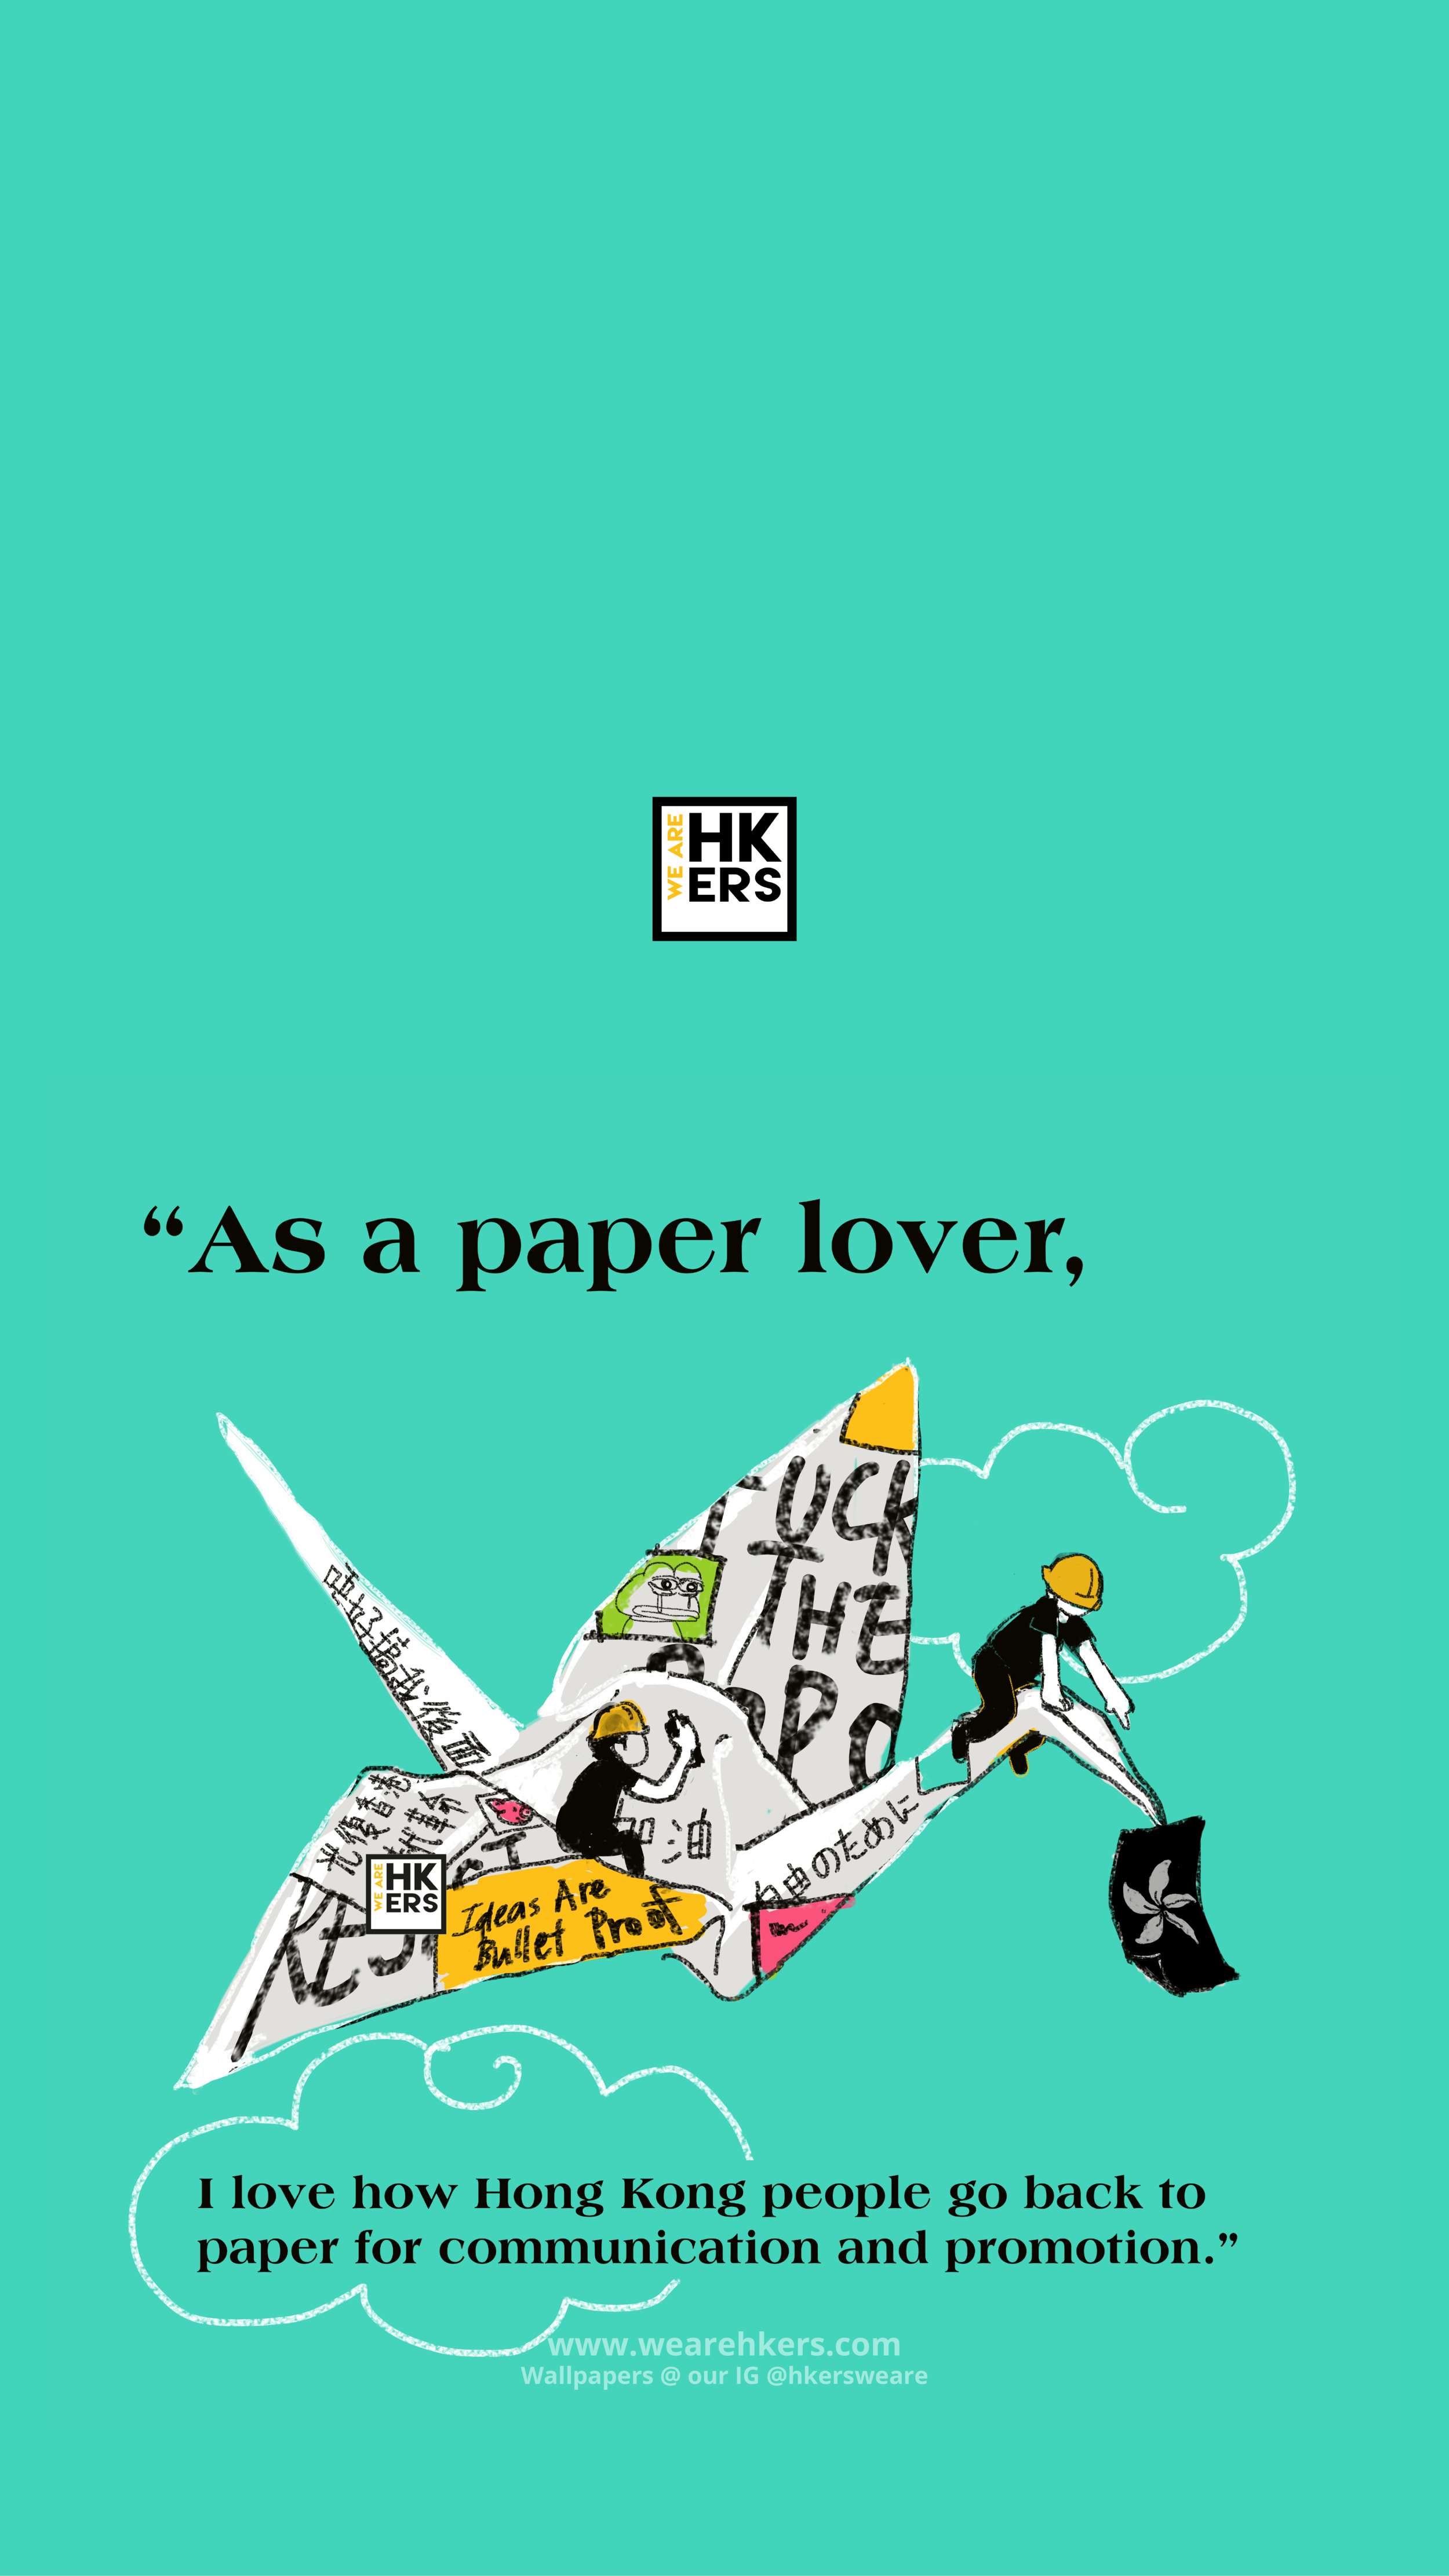 As a paper-lover, I love how Hongkongers go back to paper for communication and promotion.